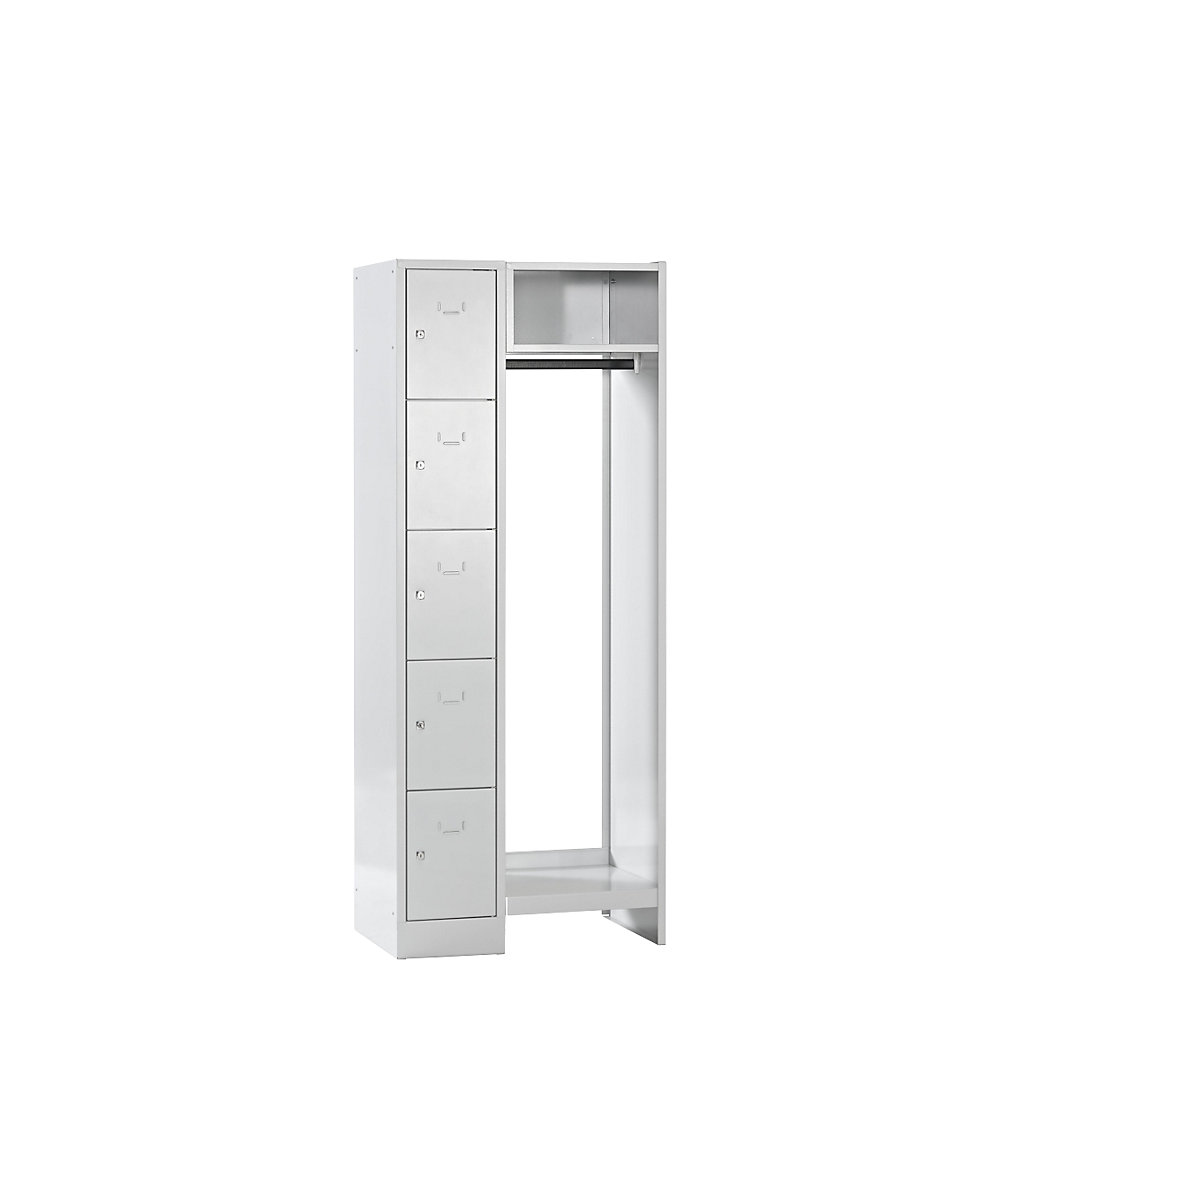 Cloakroom locker system – Wolf, 5 compartments on left, 5 coat hangers, overall width 750 mm, compartment width 298 mm, light grey / light grey-10